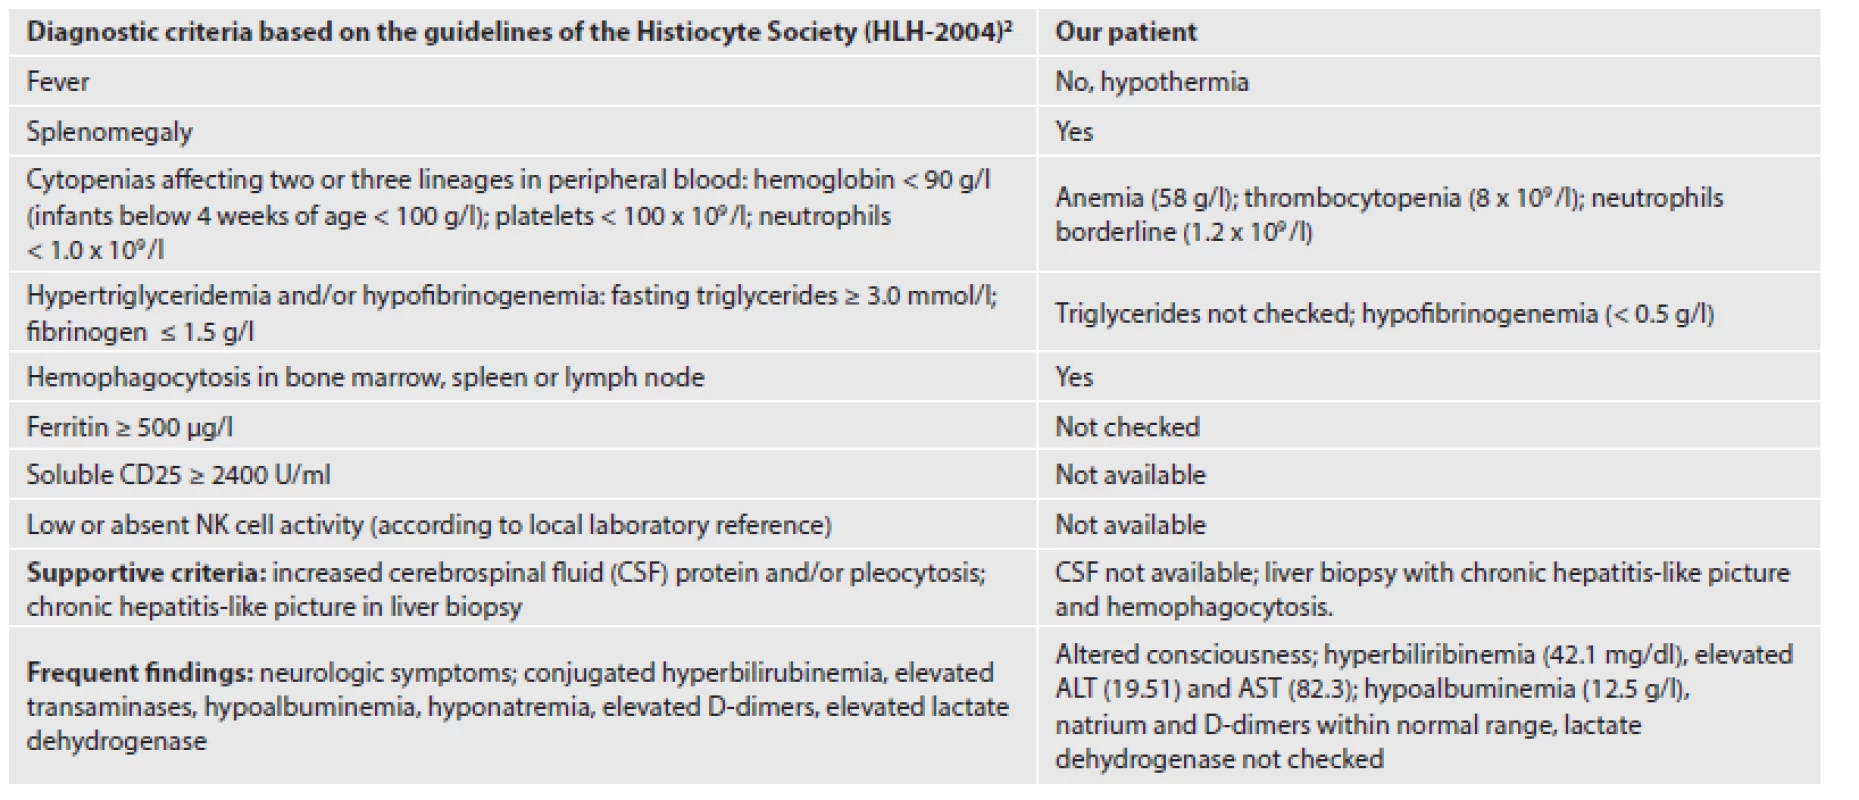 Diagnostic and supportive criteria of HLH fulfilled in our patient.